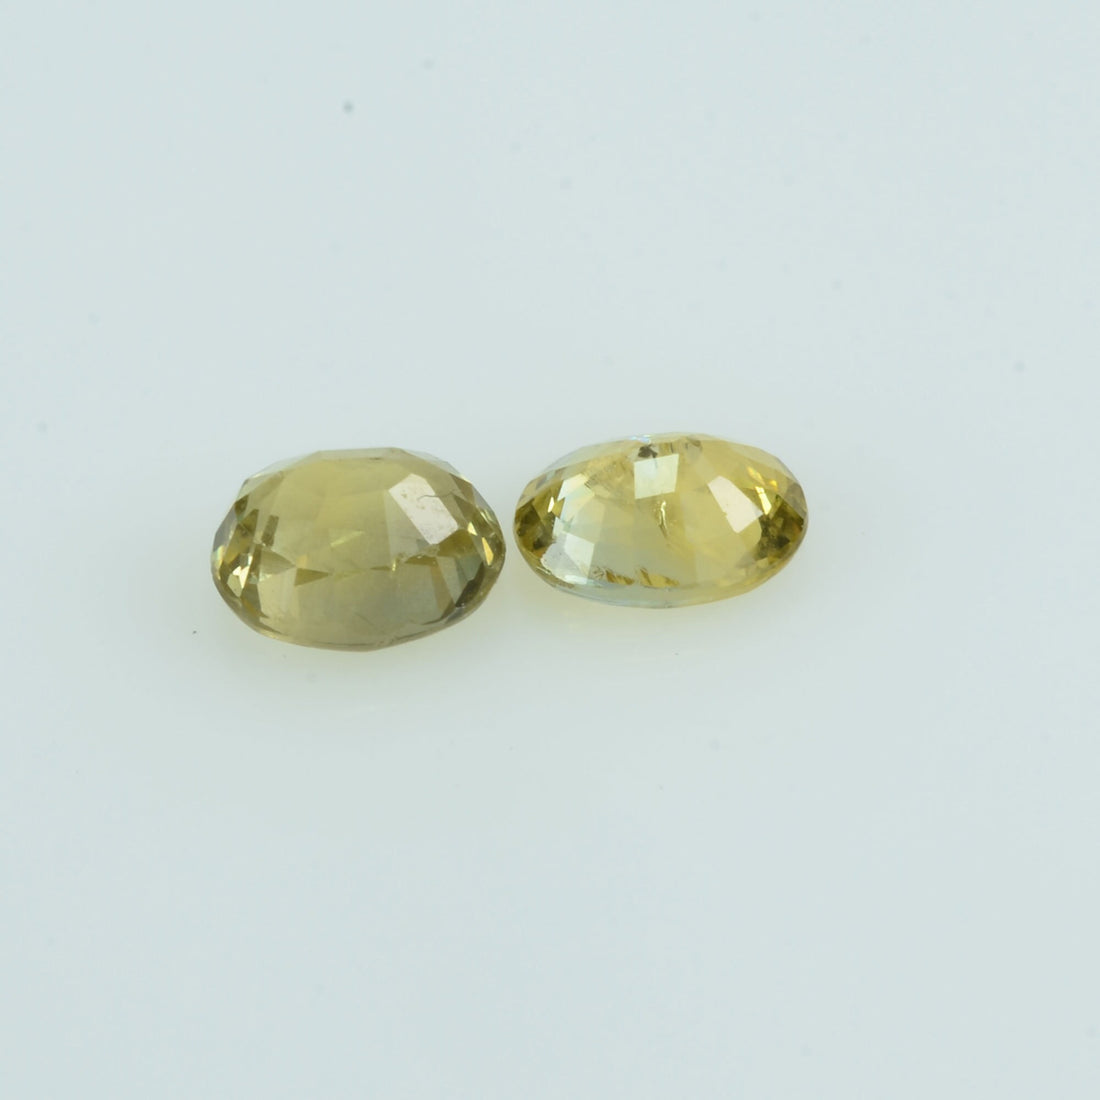 0.99 cts Natural Fancy Sapphire Loose Pair Gemstone Oval Cut